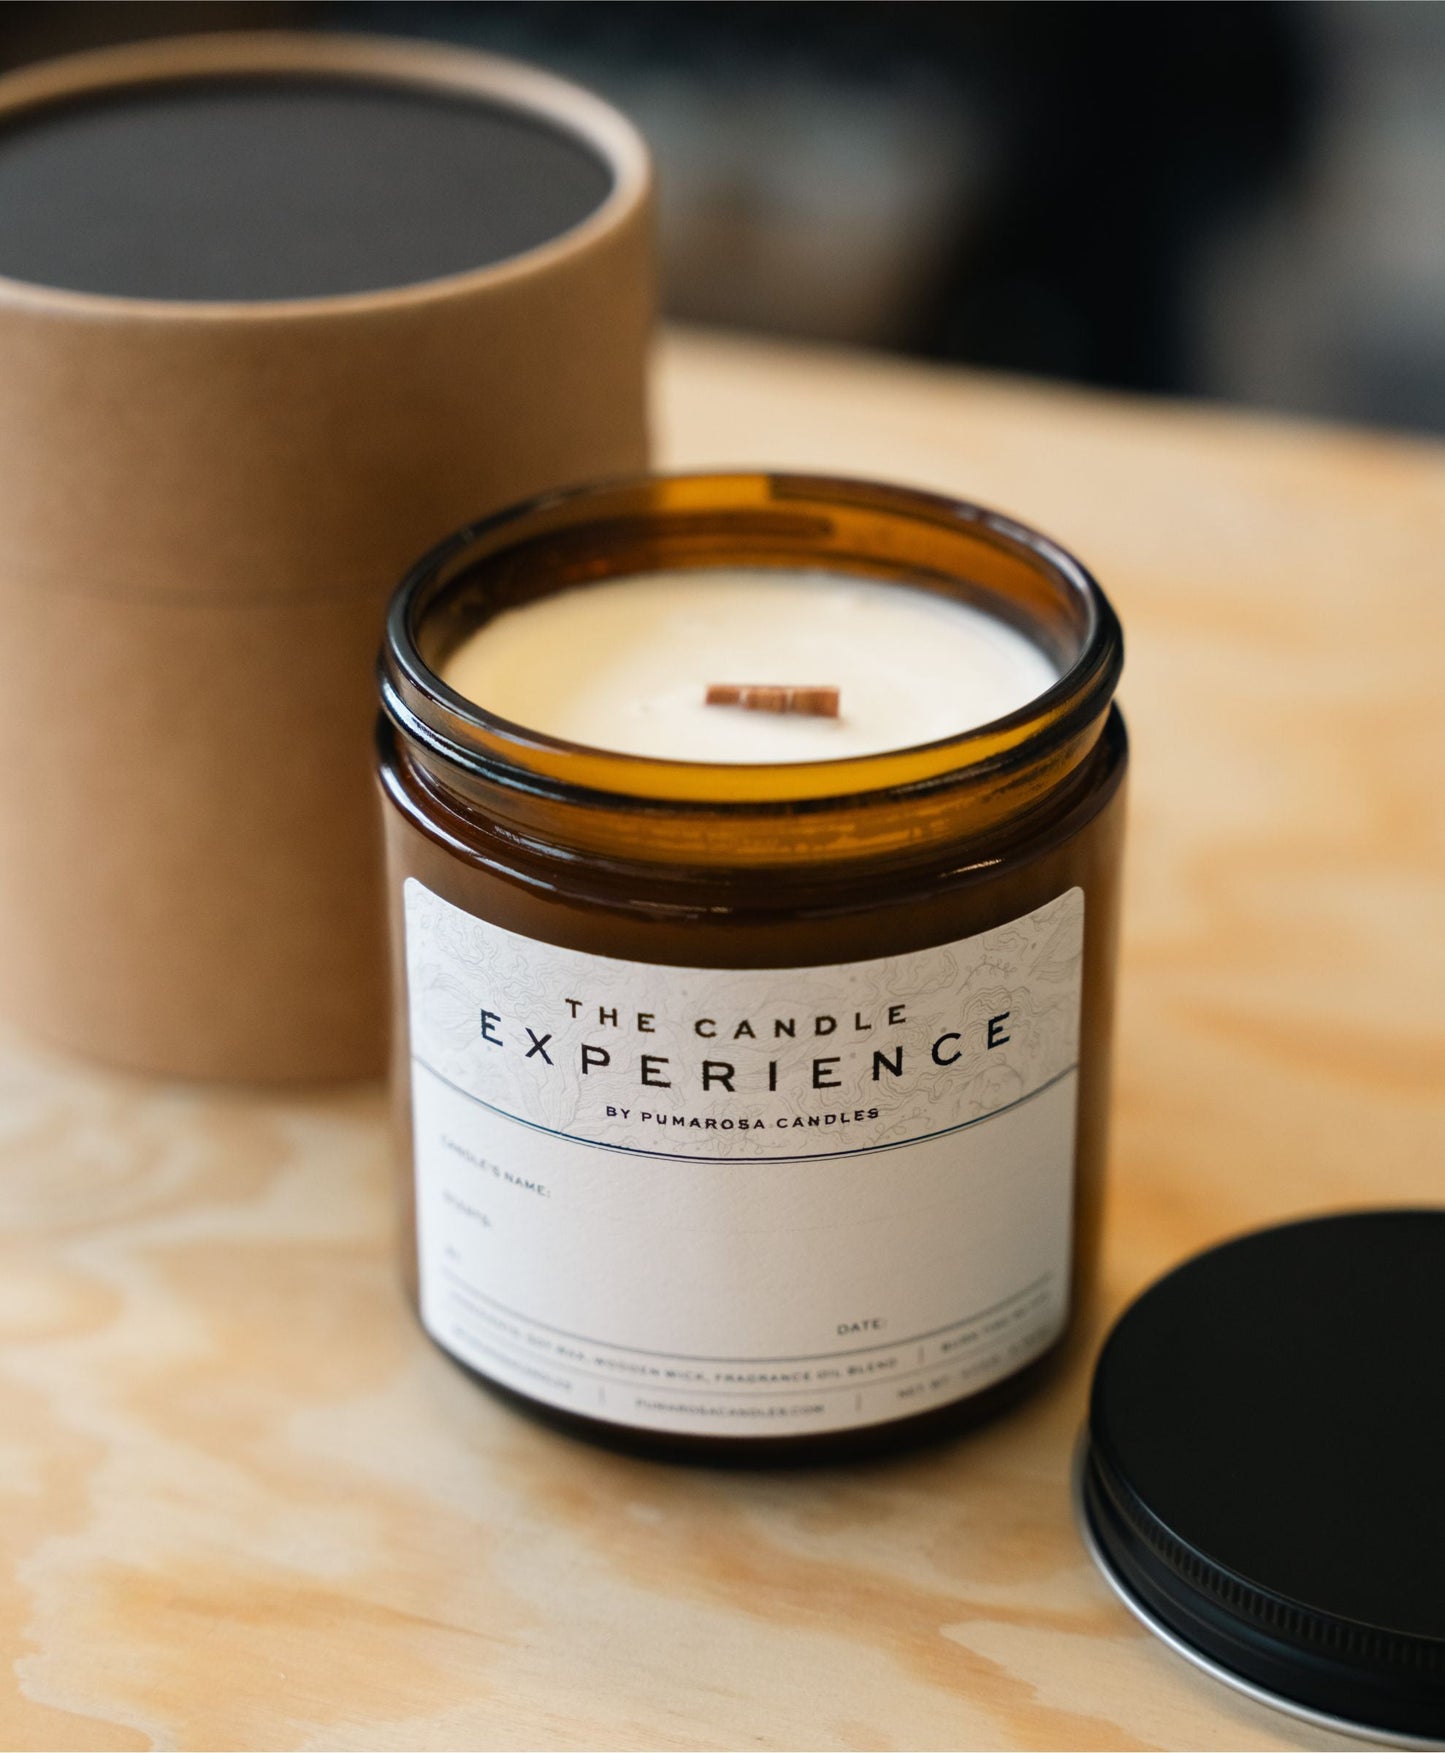 Candle-Making Experience: March, 14th at 6pm